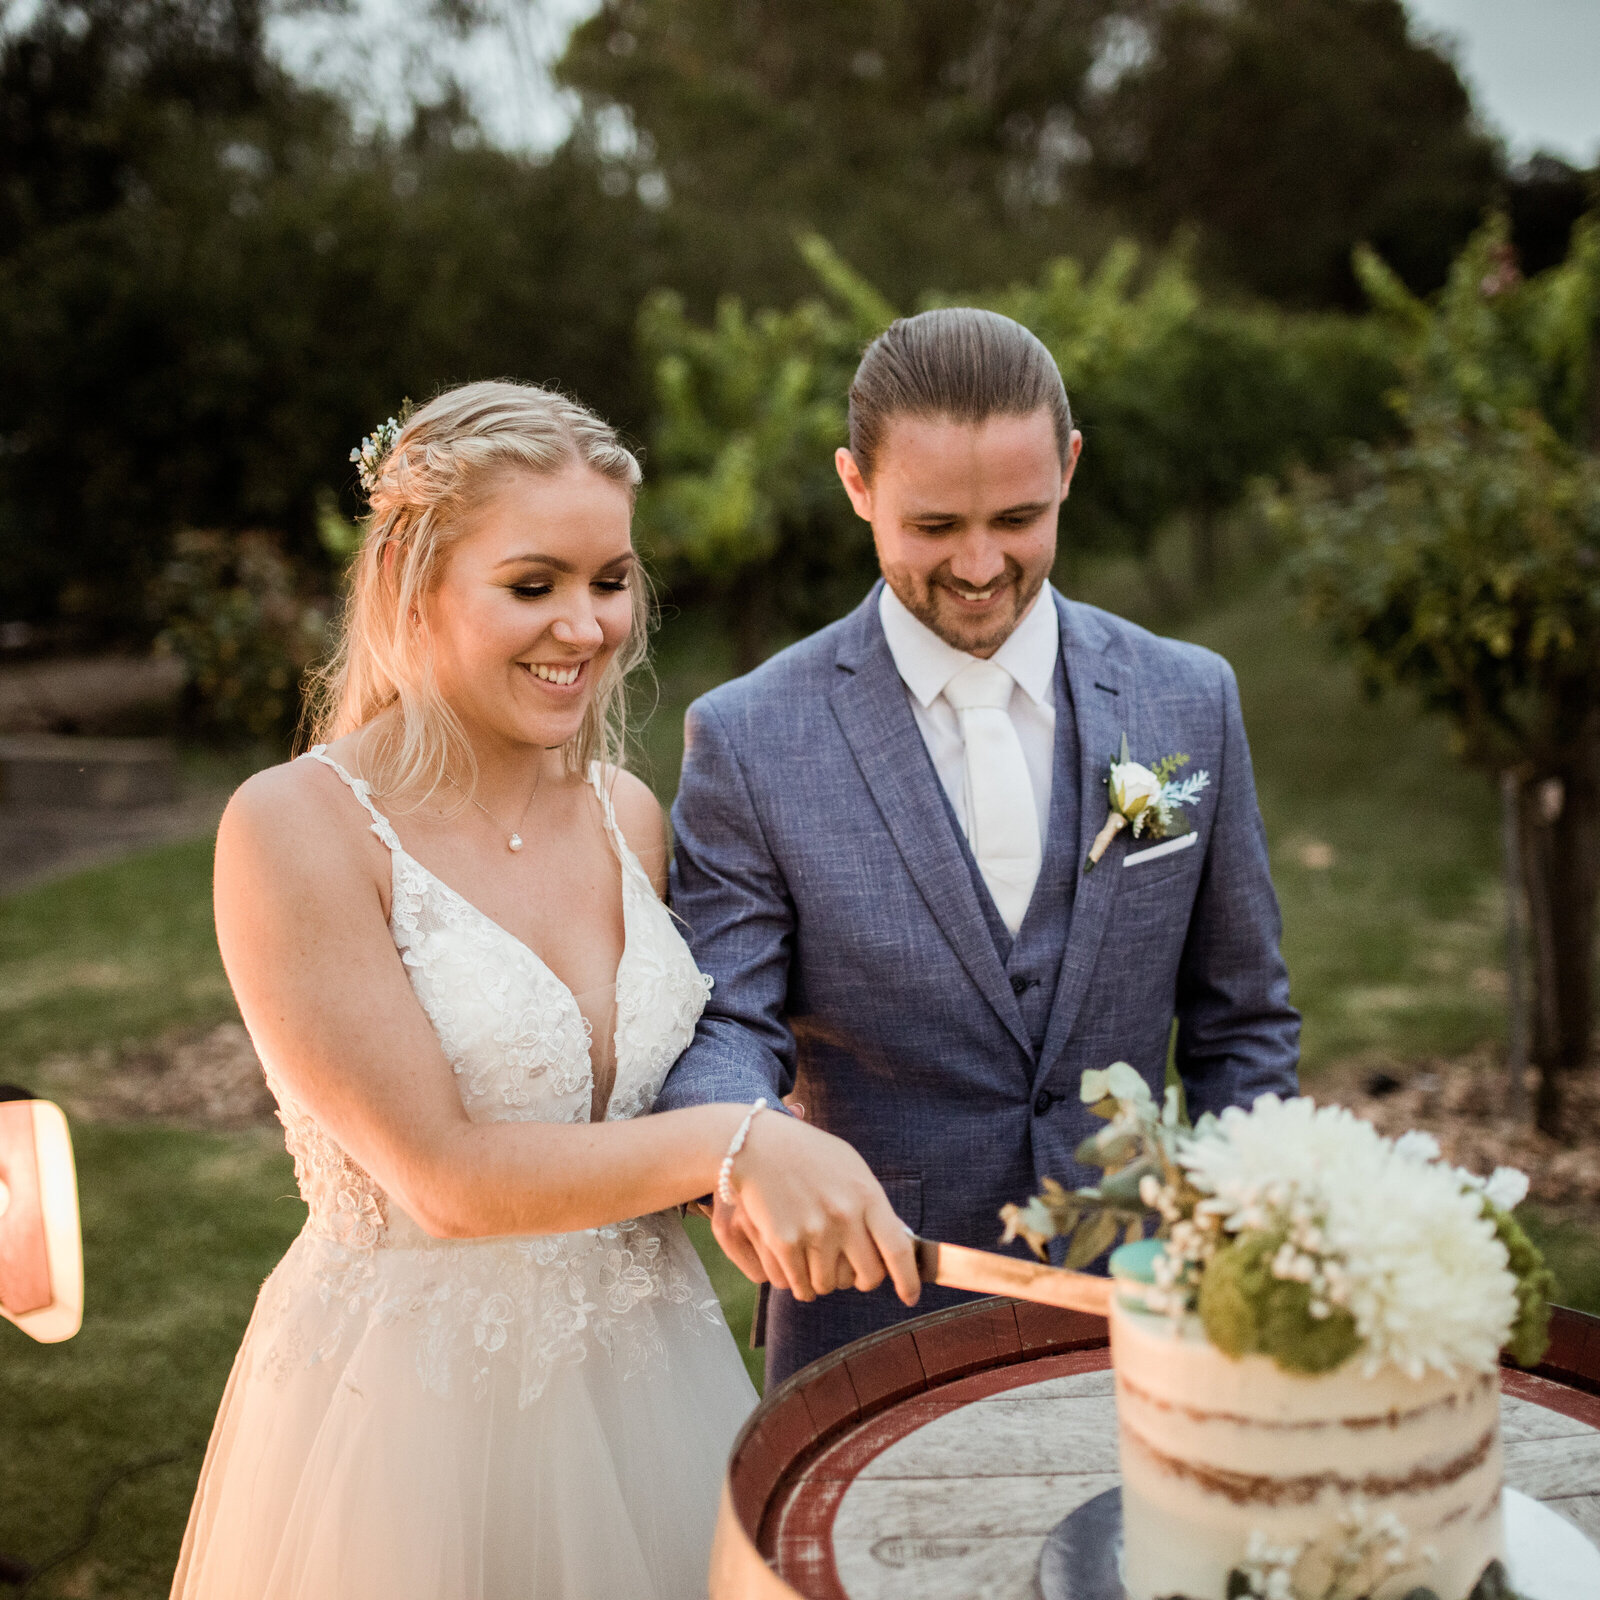 Meagan-Charlie-Wedding-Mount-Gambier-Rexvil-Photography-135